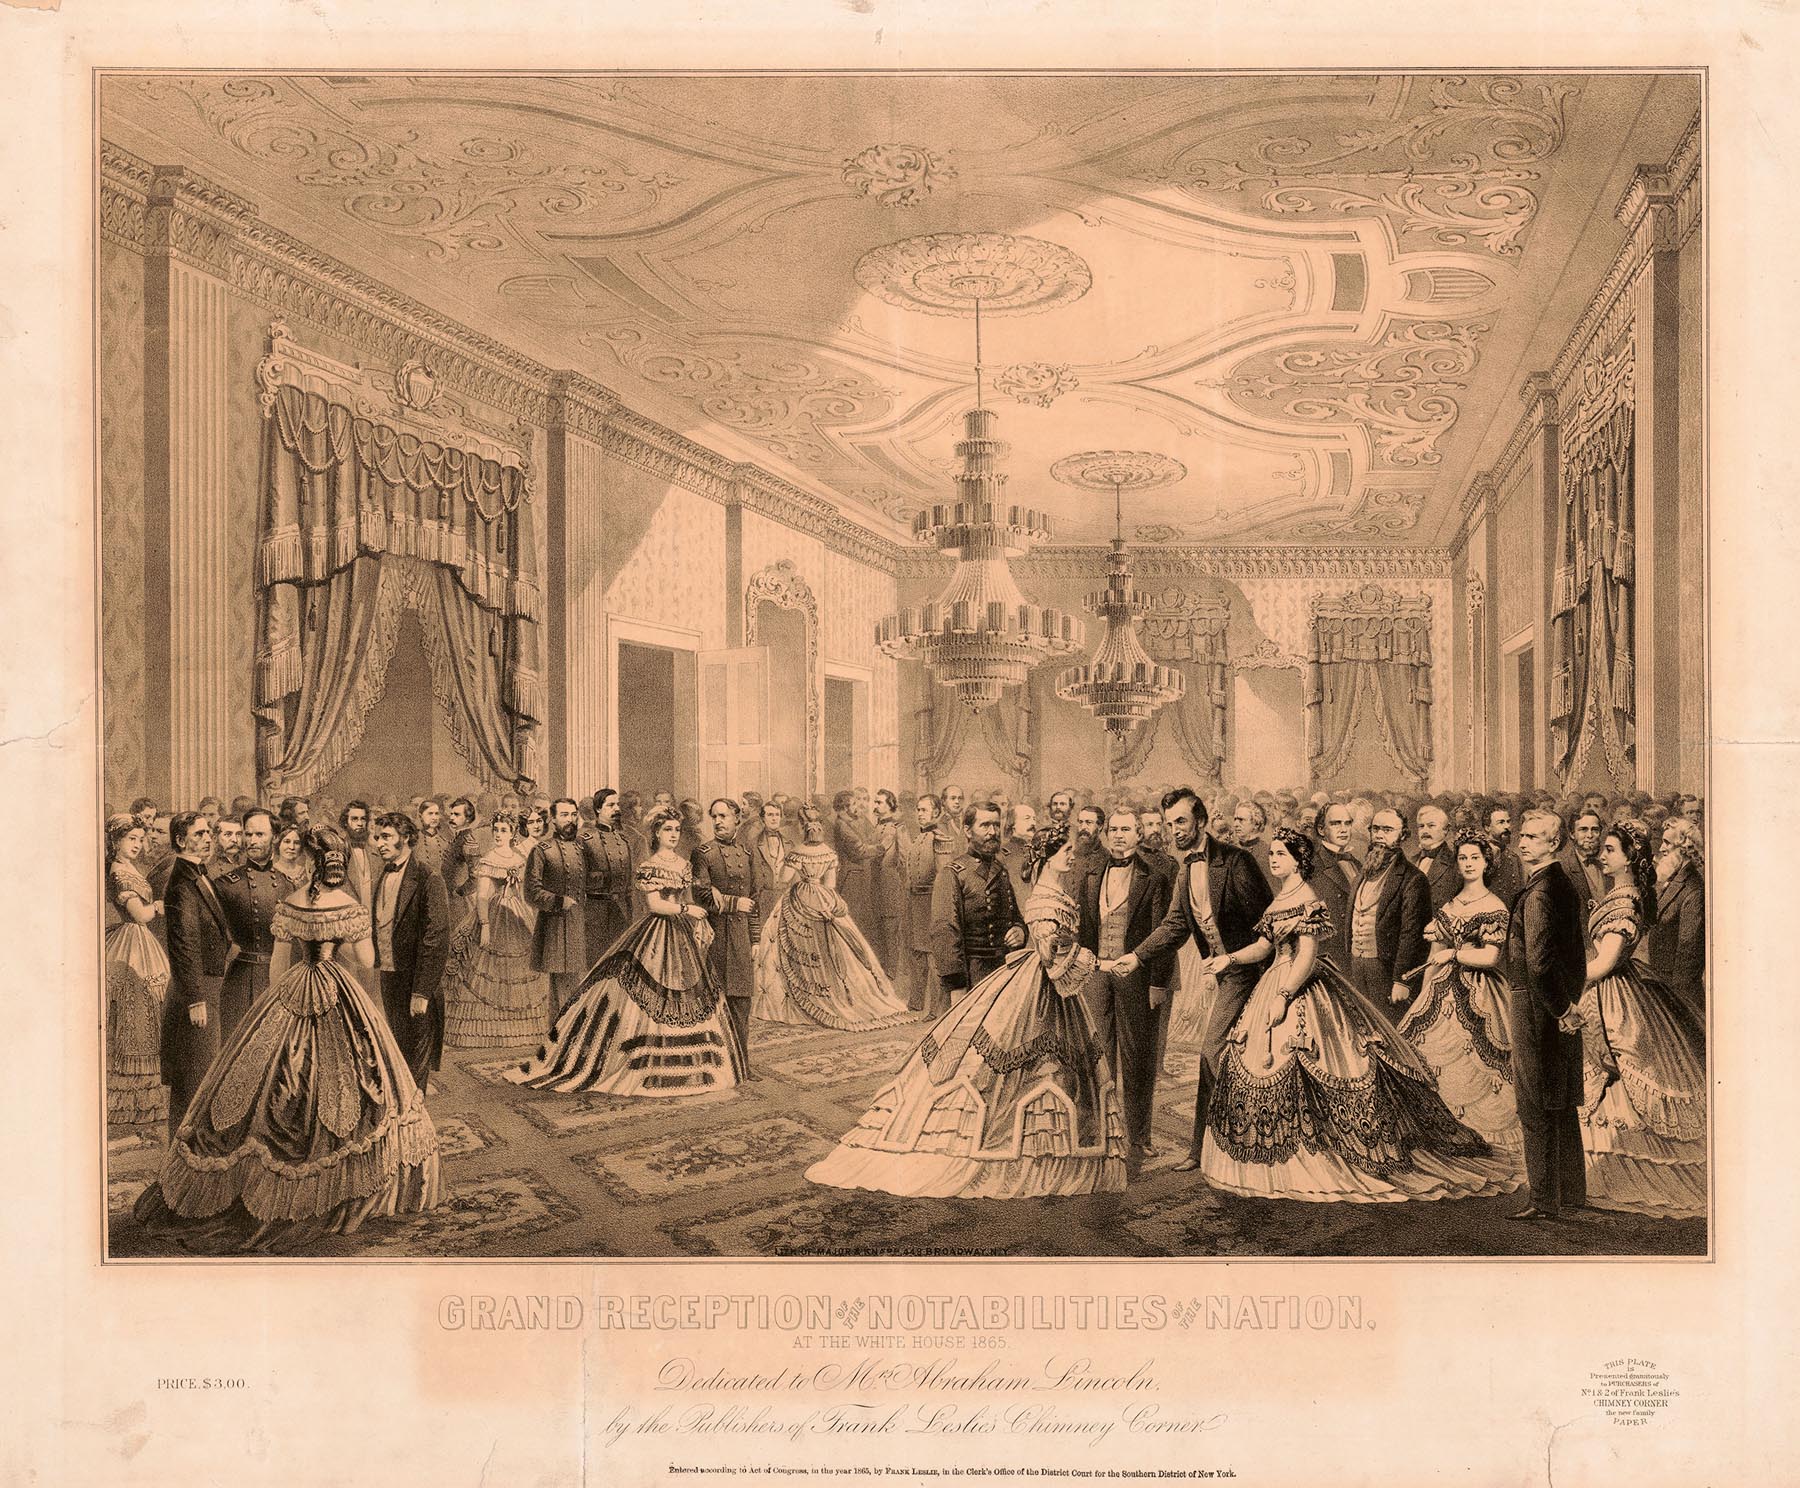 Grand reception of the notabilities of the nation, at the White House 1865 